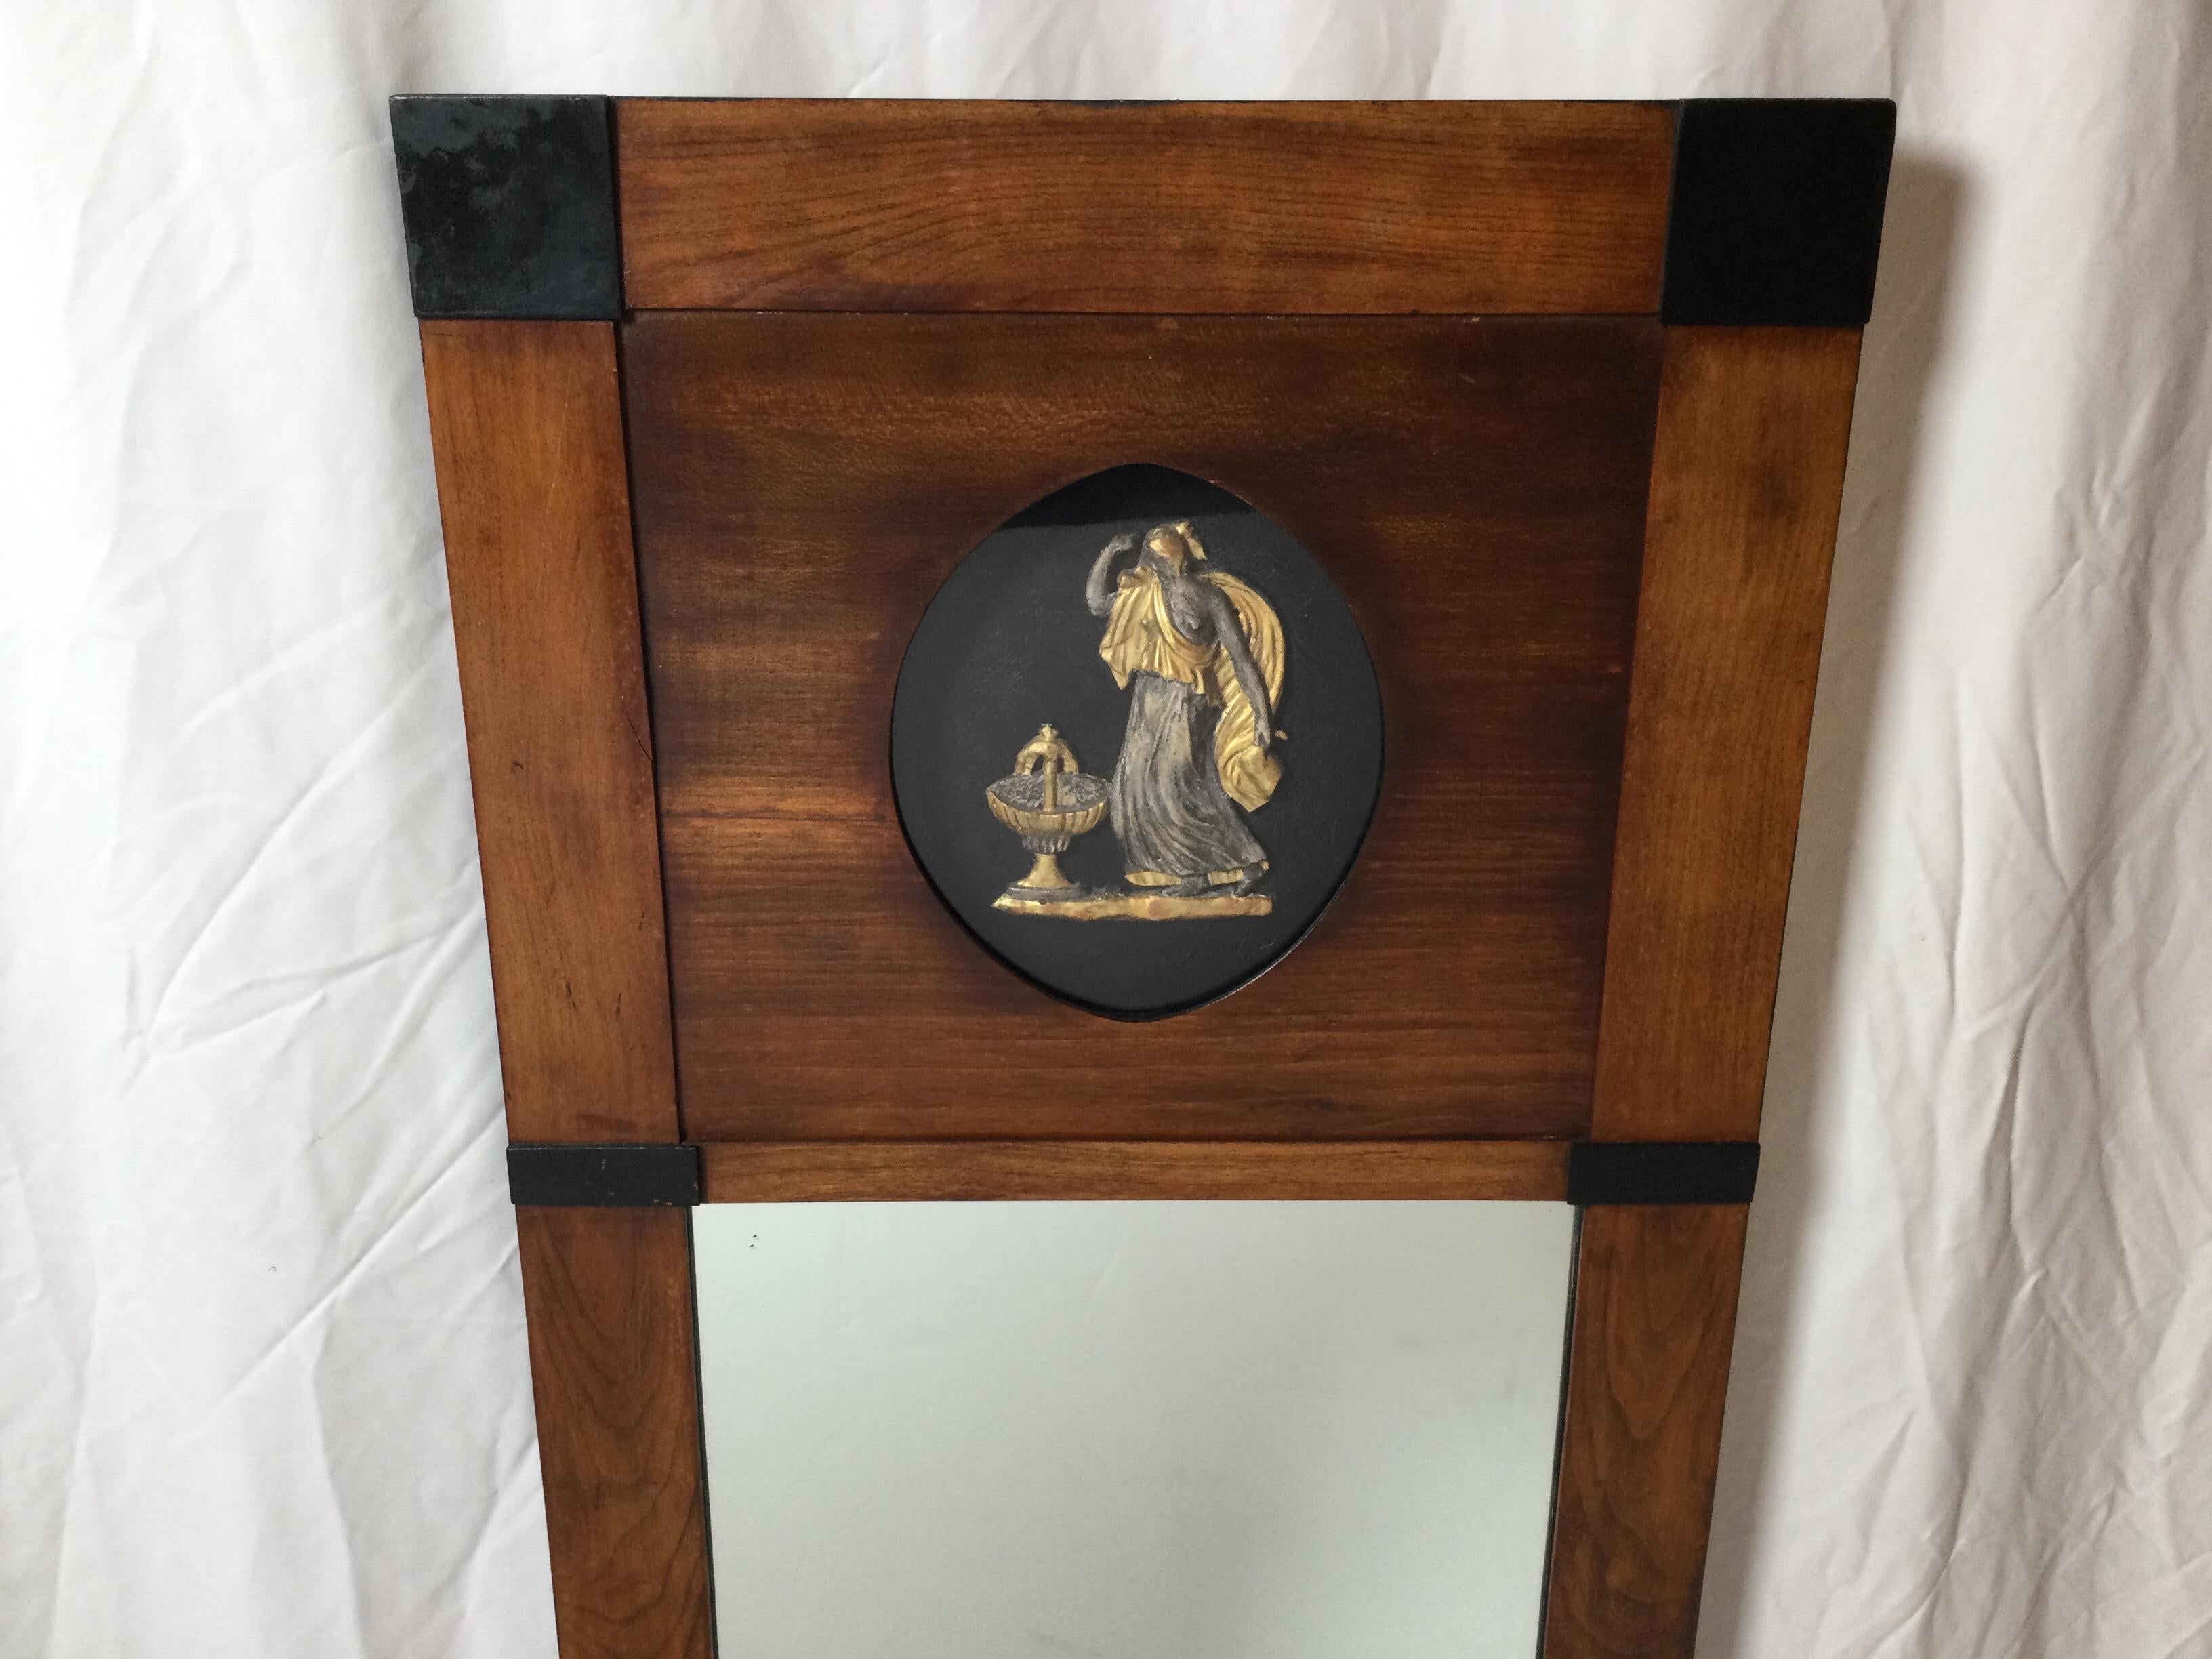 The slender mirror with a recently french polished mahogany frame with a high relief cartouche of a neoclassical draped lady. The frame with ebonized wood accents. The mirror has been replaced.